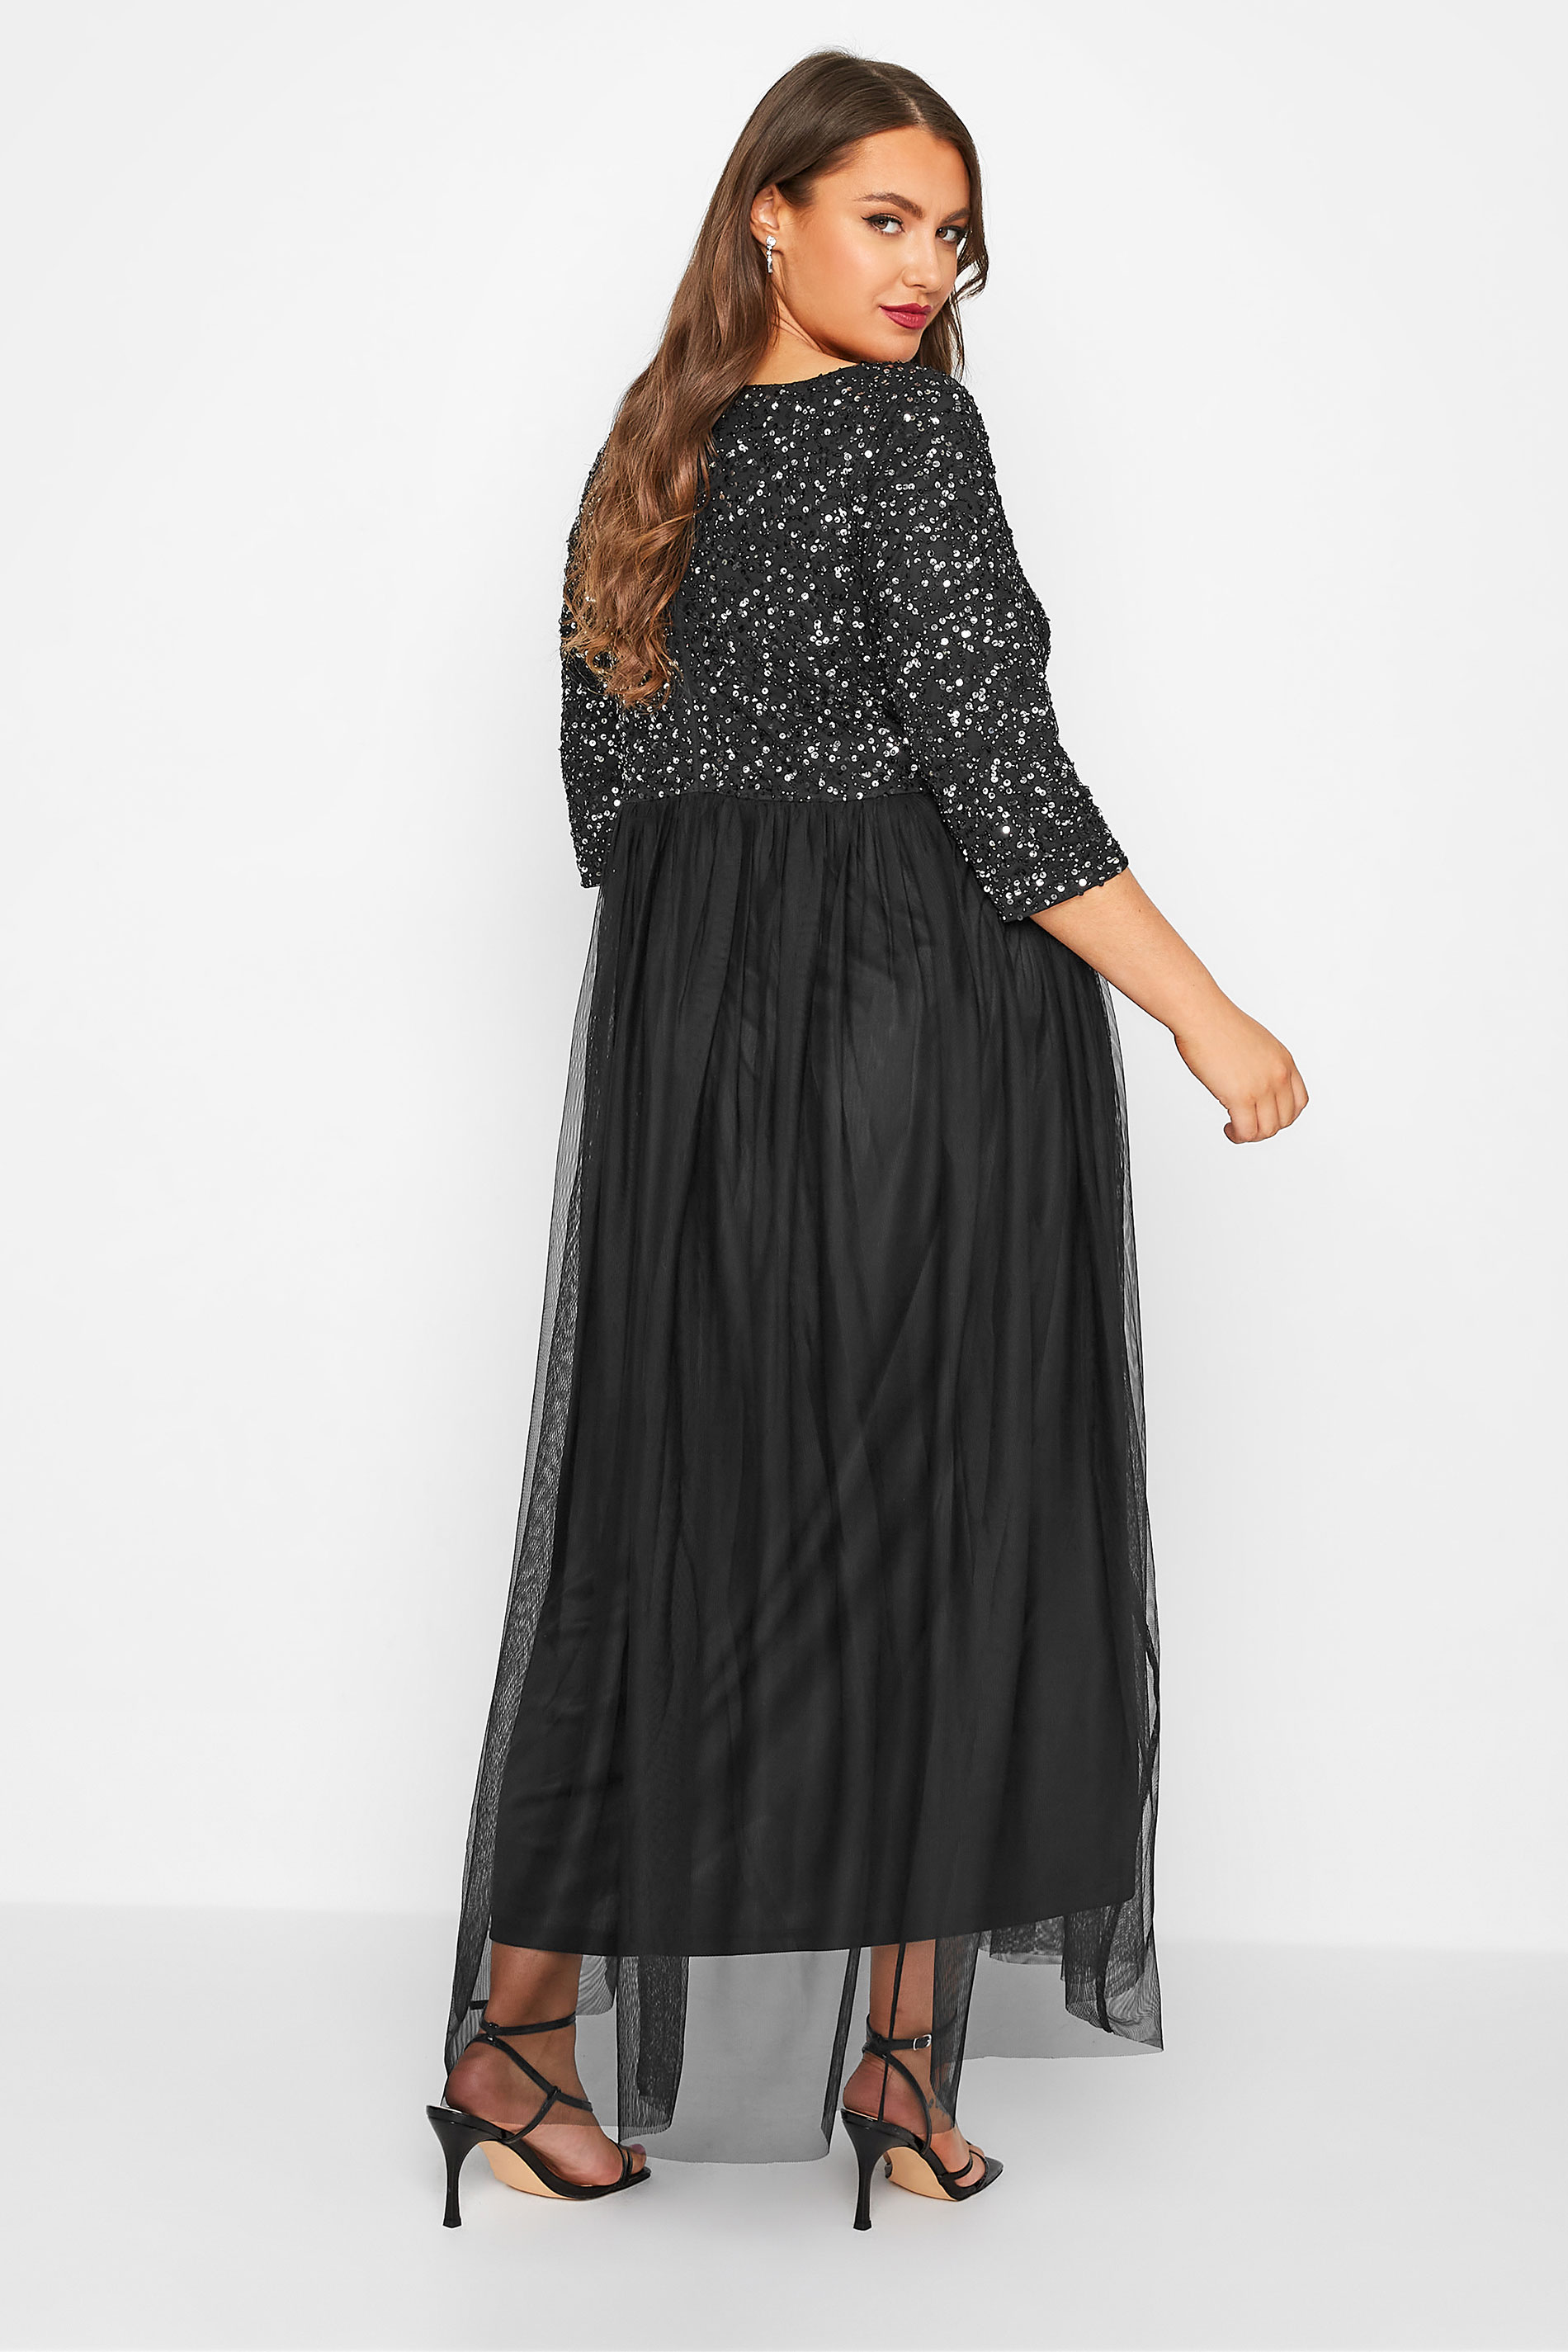 LUXE Plus Size Black Sequin Hand Embellished Maxi Dress | Yours Clothing 3